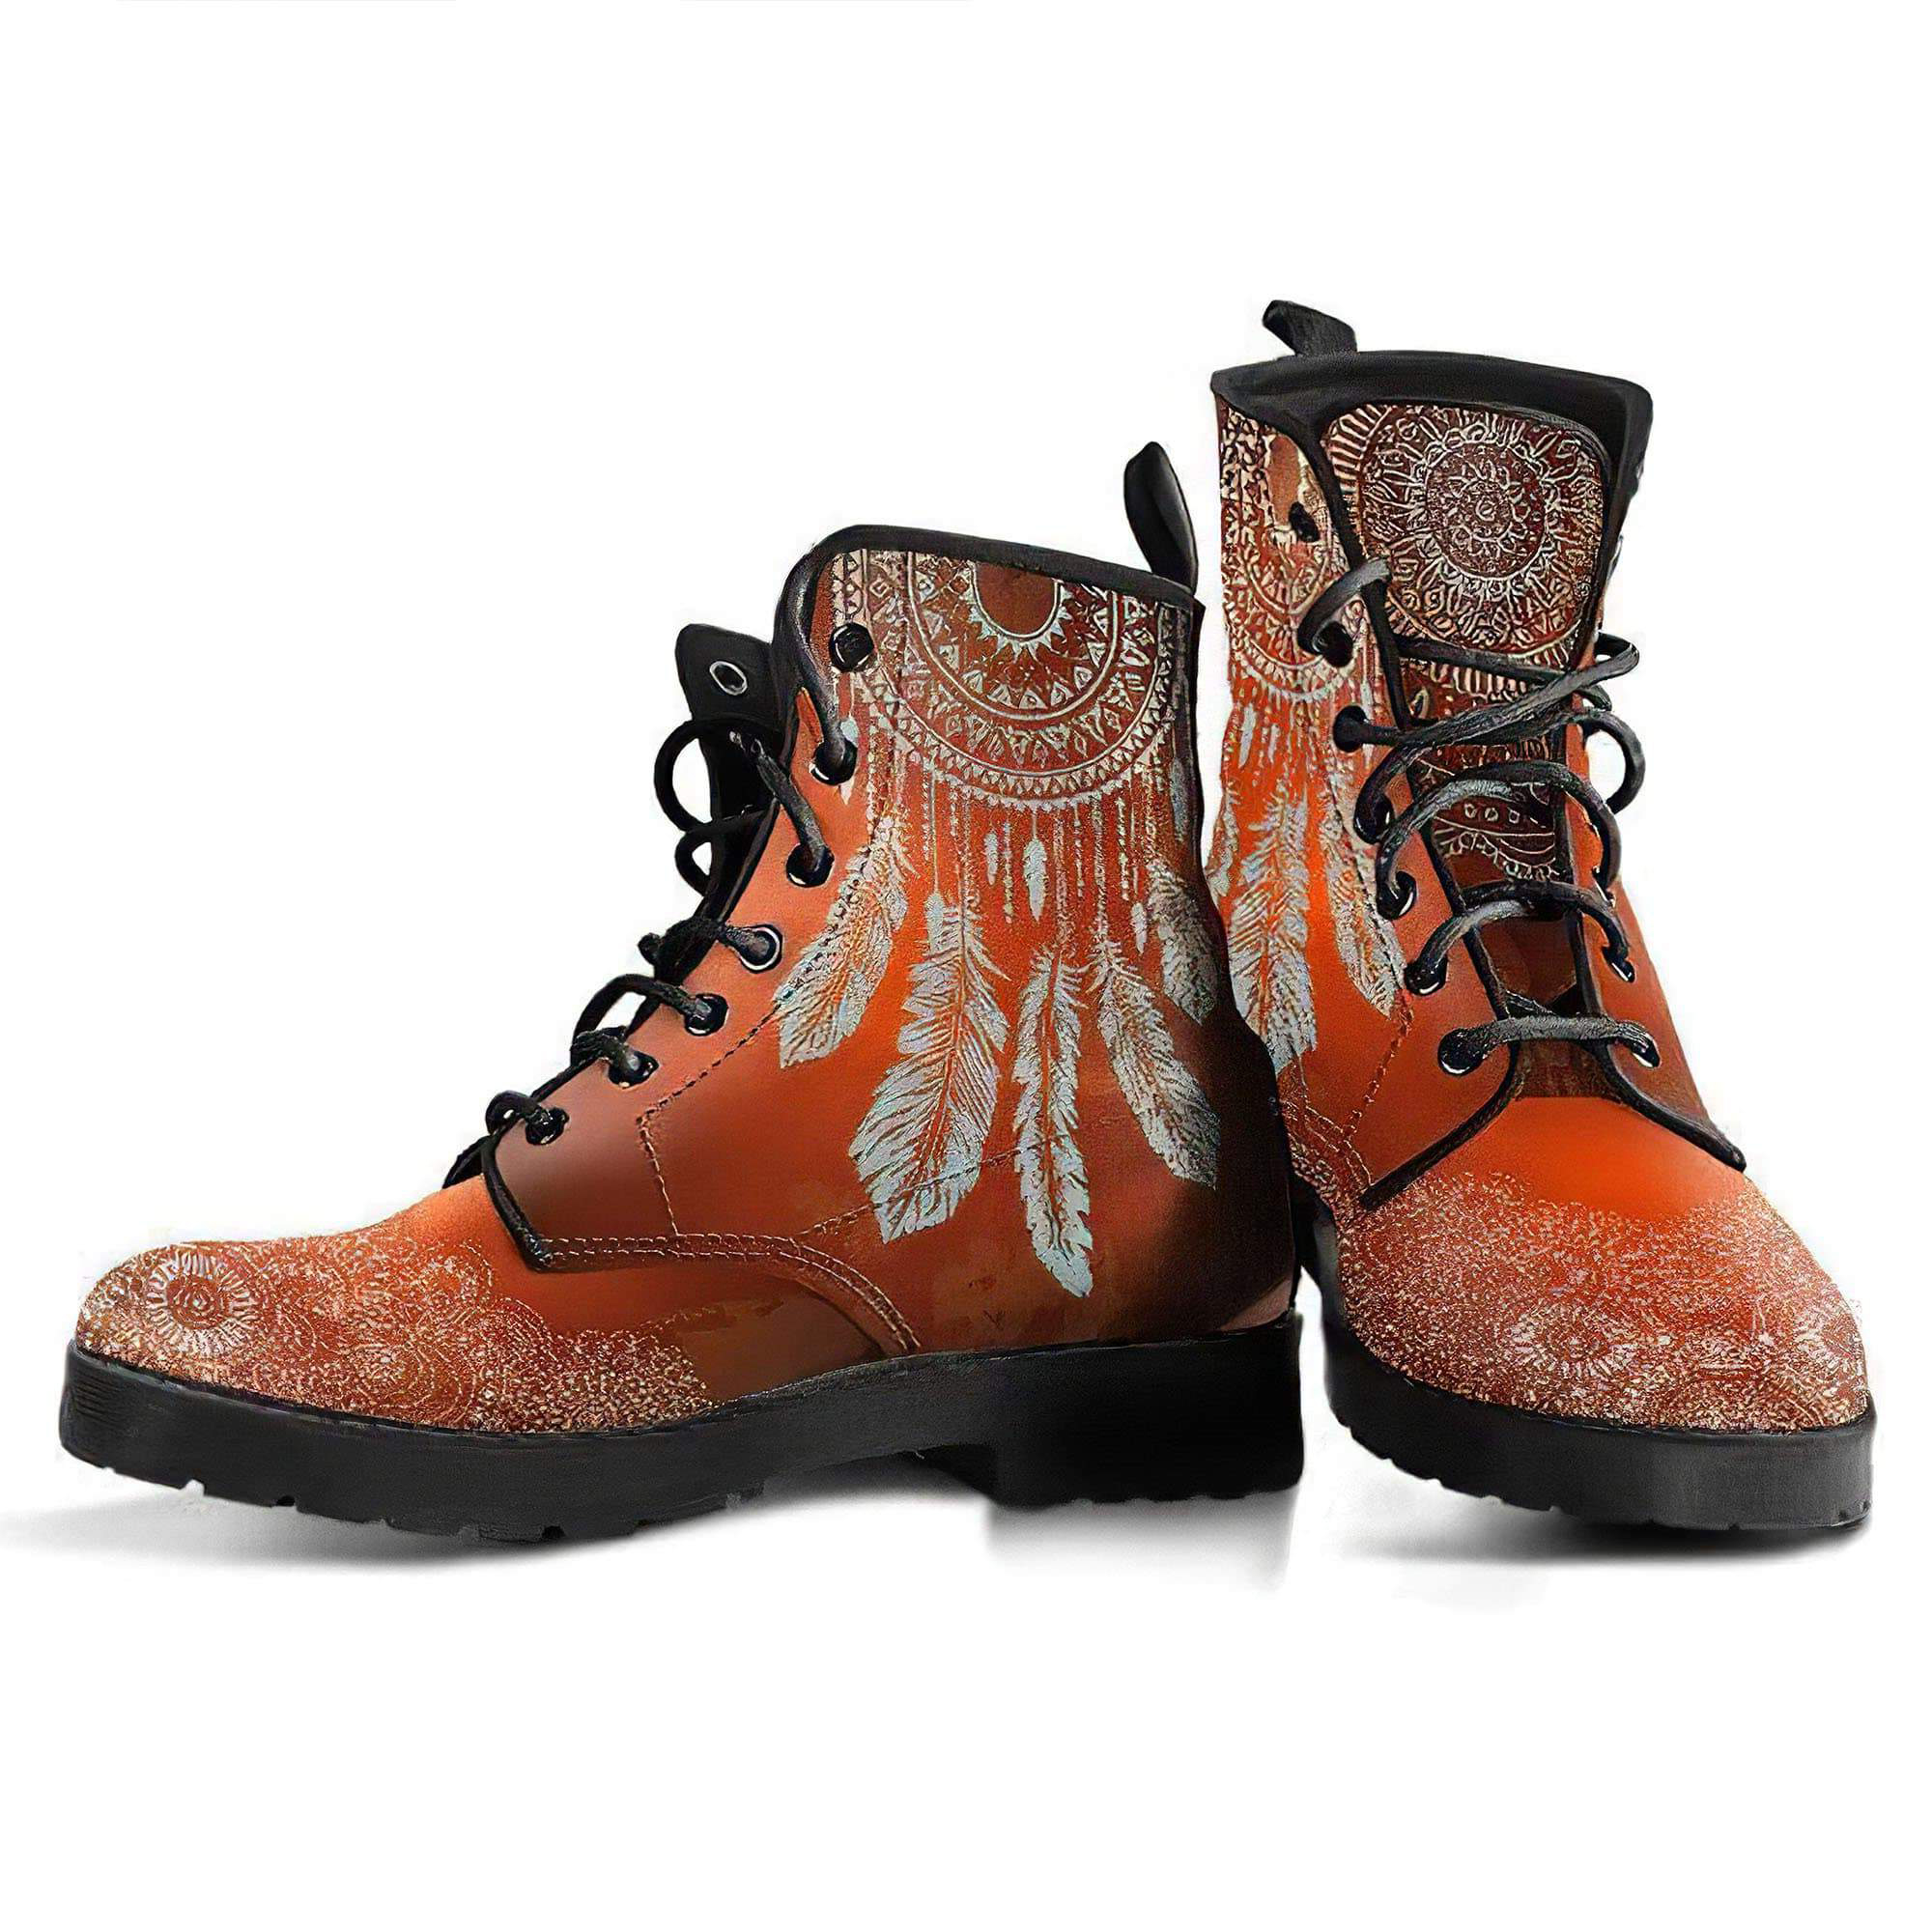 red-dreamcatcher-handcrafted-boots-women-s-leather-boots-12051943030845.jpg